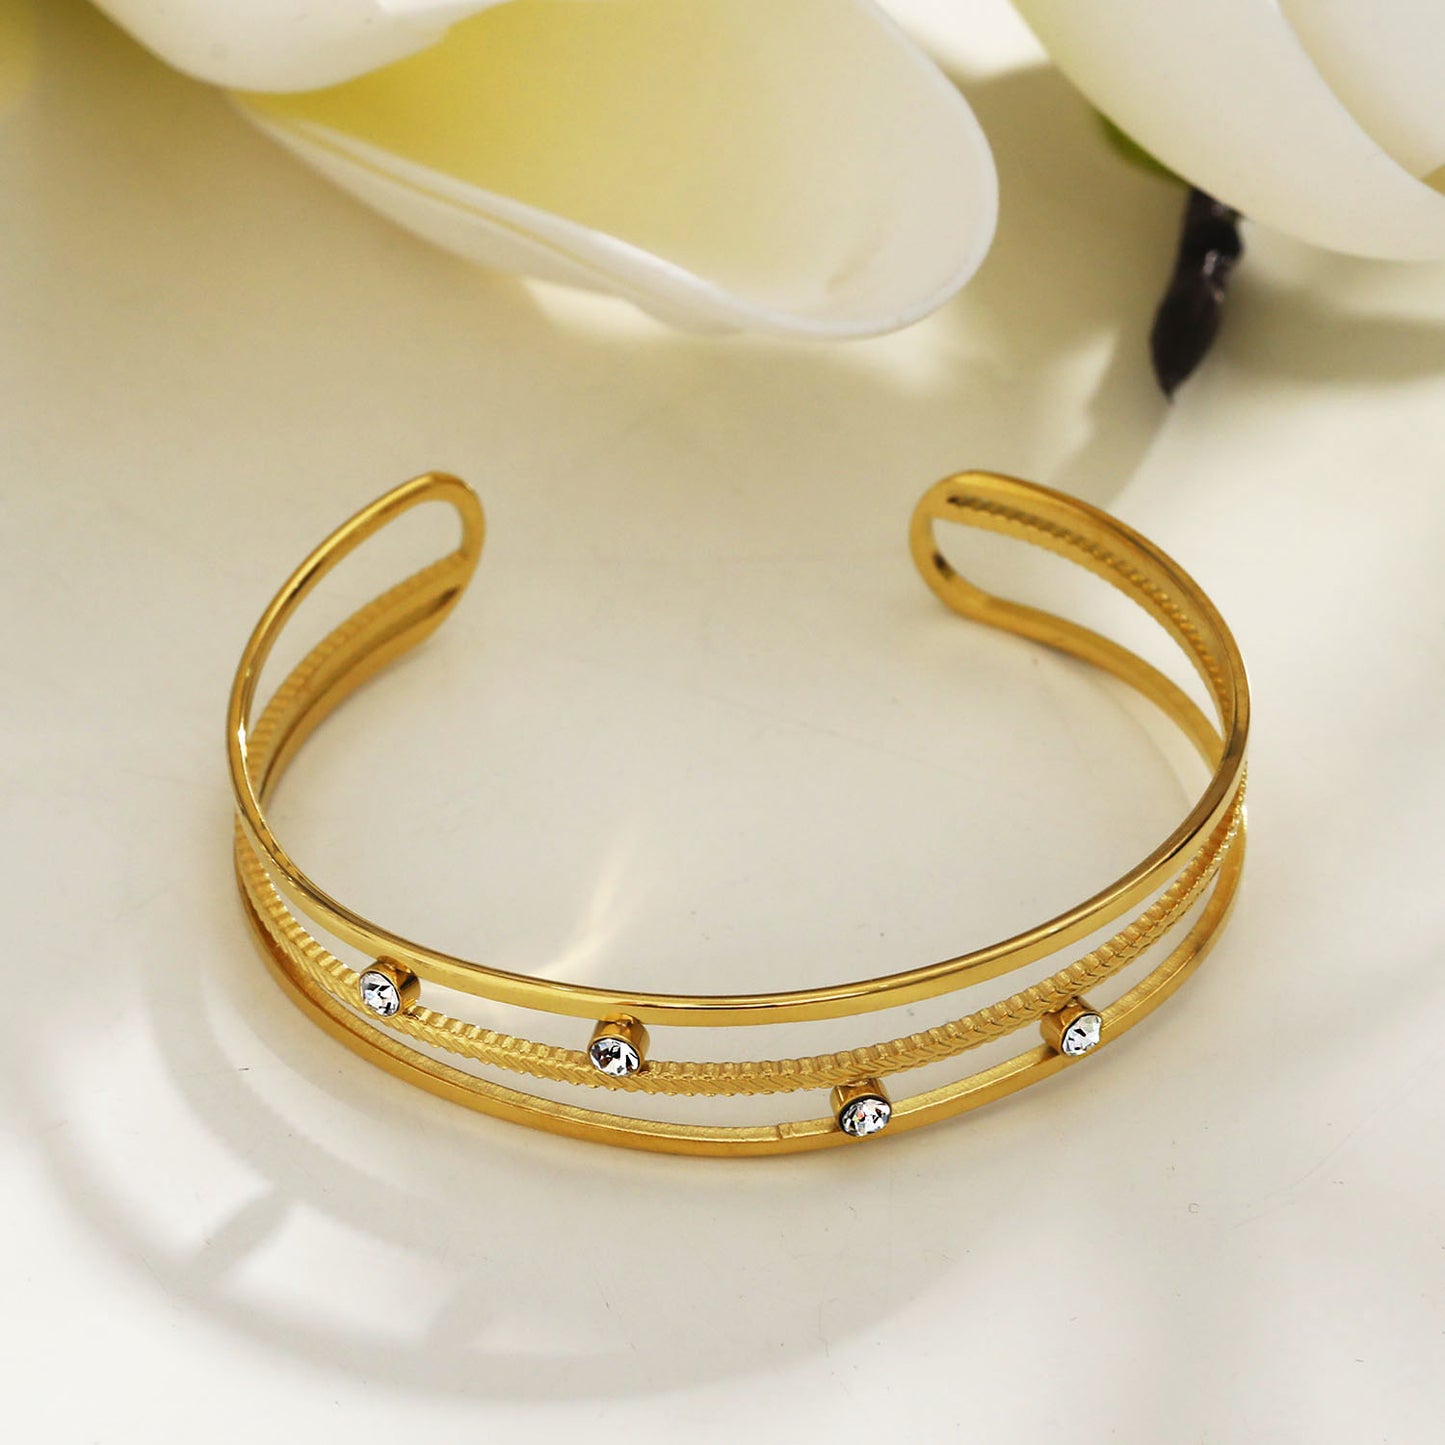 Style: LADARIA 221025 'Trio of Cuffs' Bracelet with Zirconia Highlights.